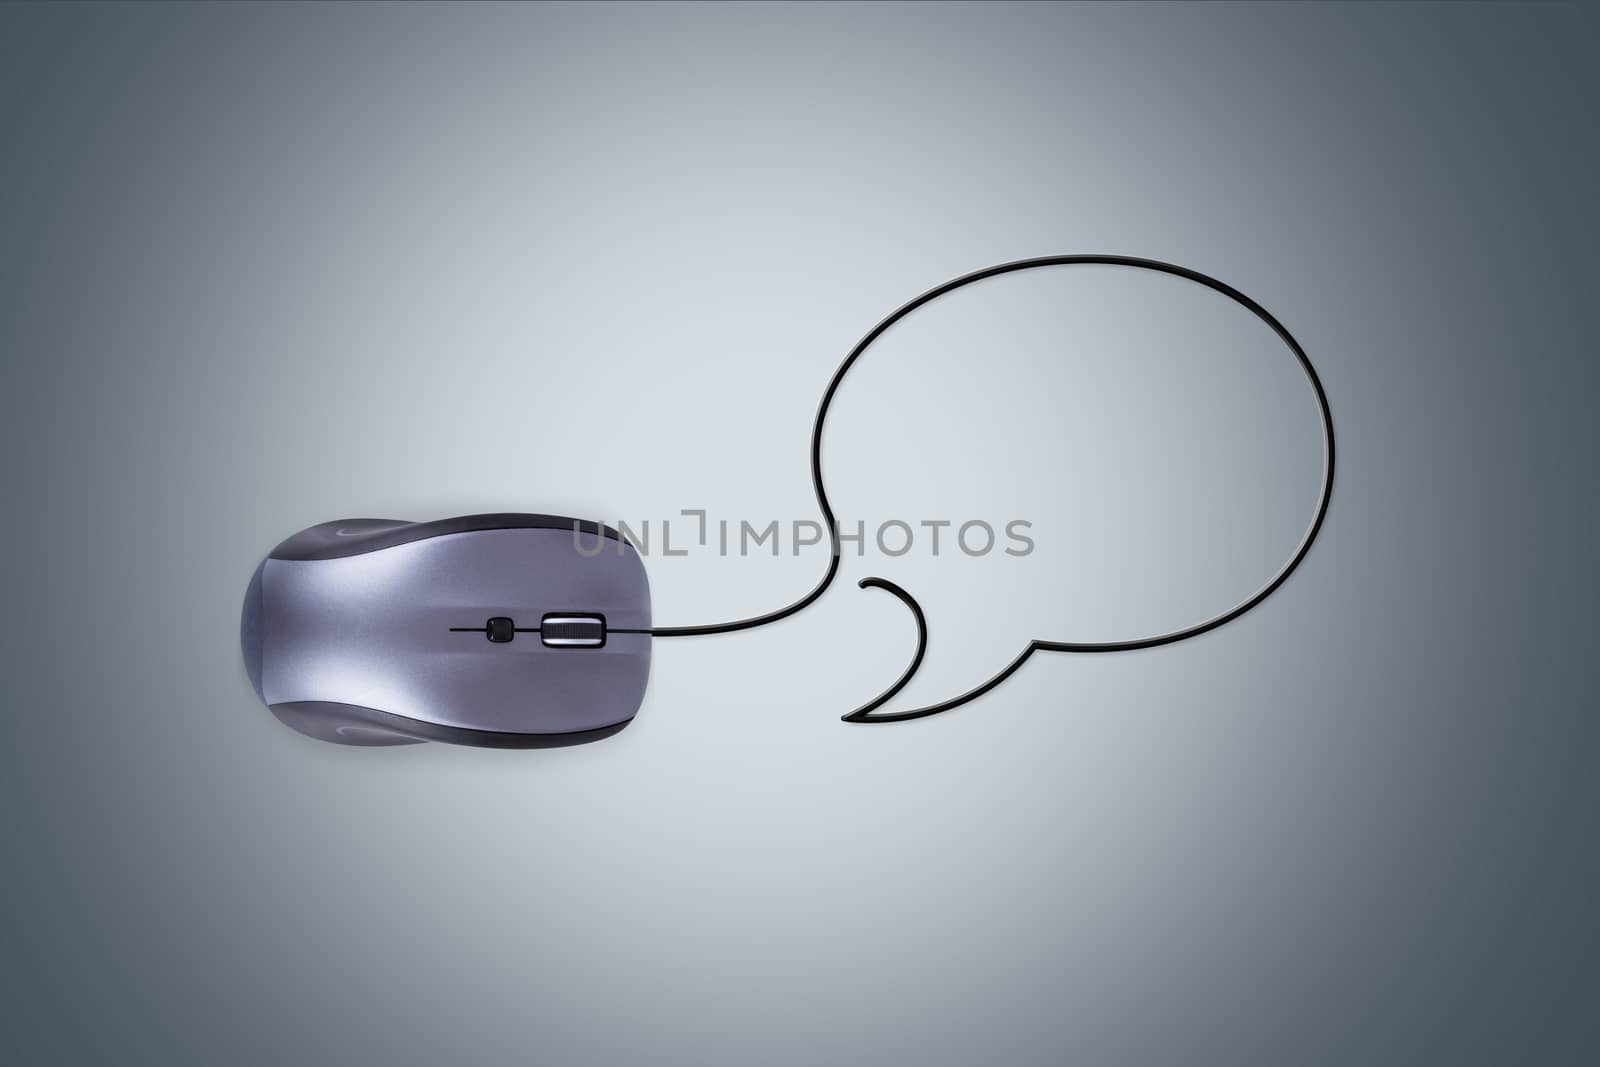 Communication concept, mouse with cable in form of speech bubble over dark background.